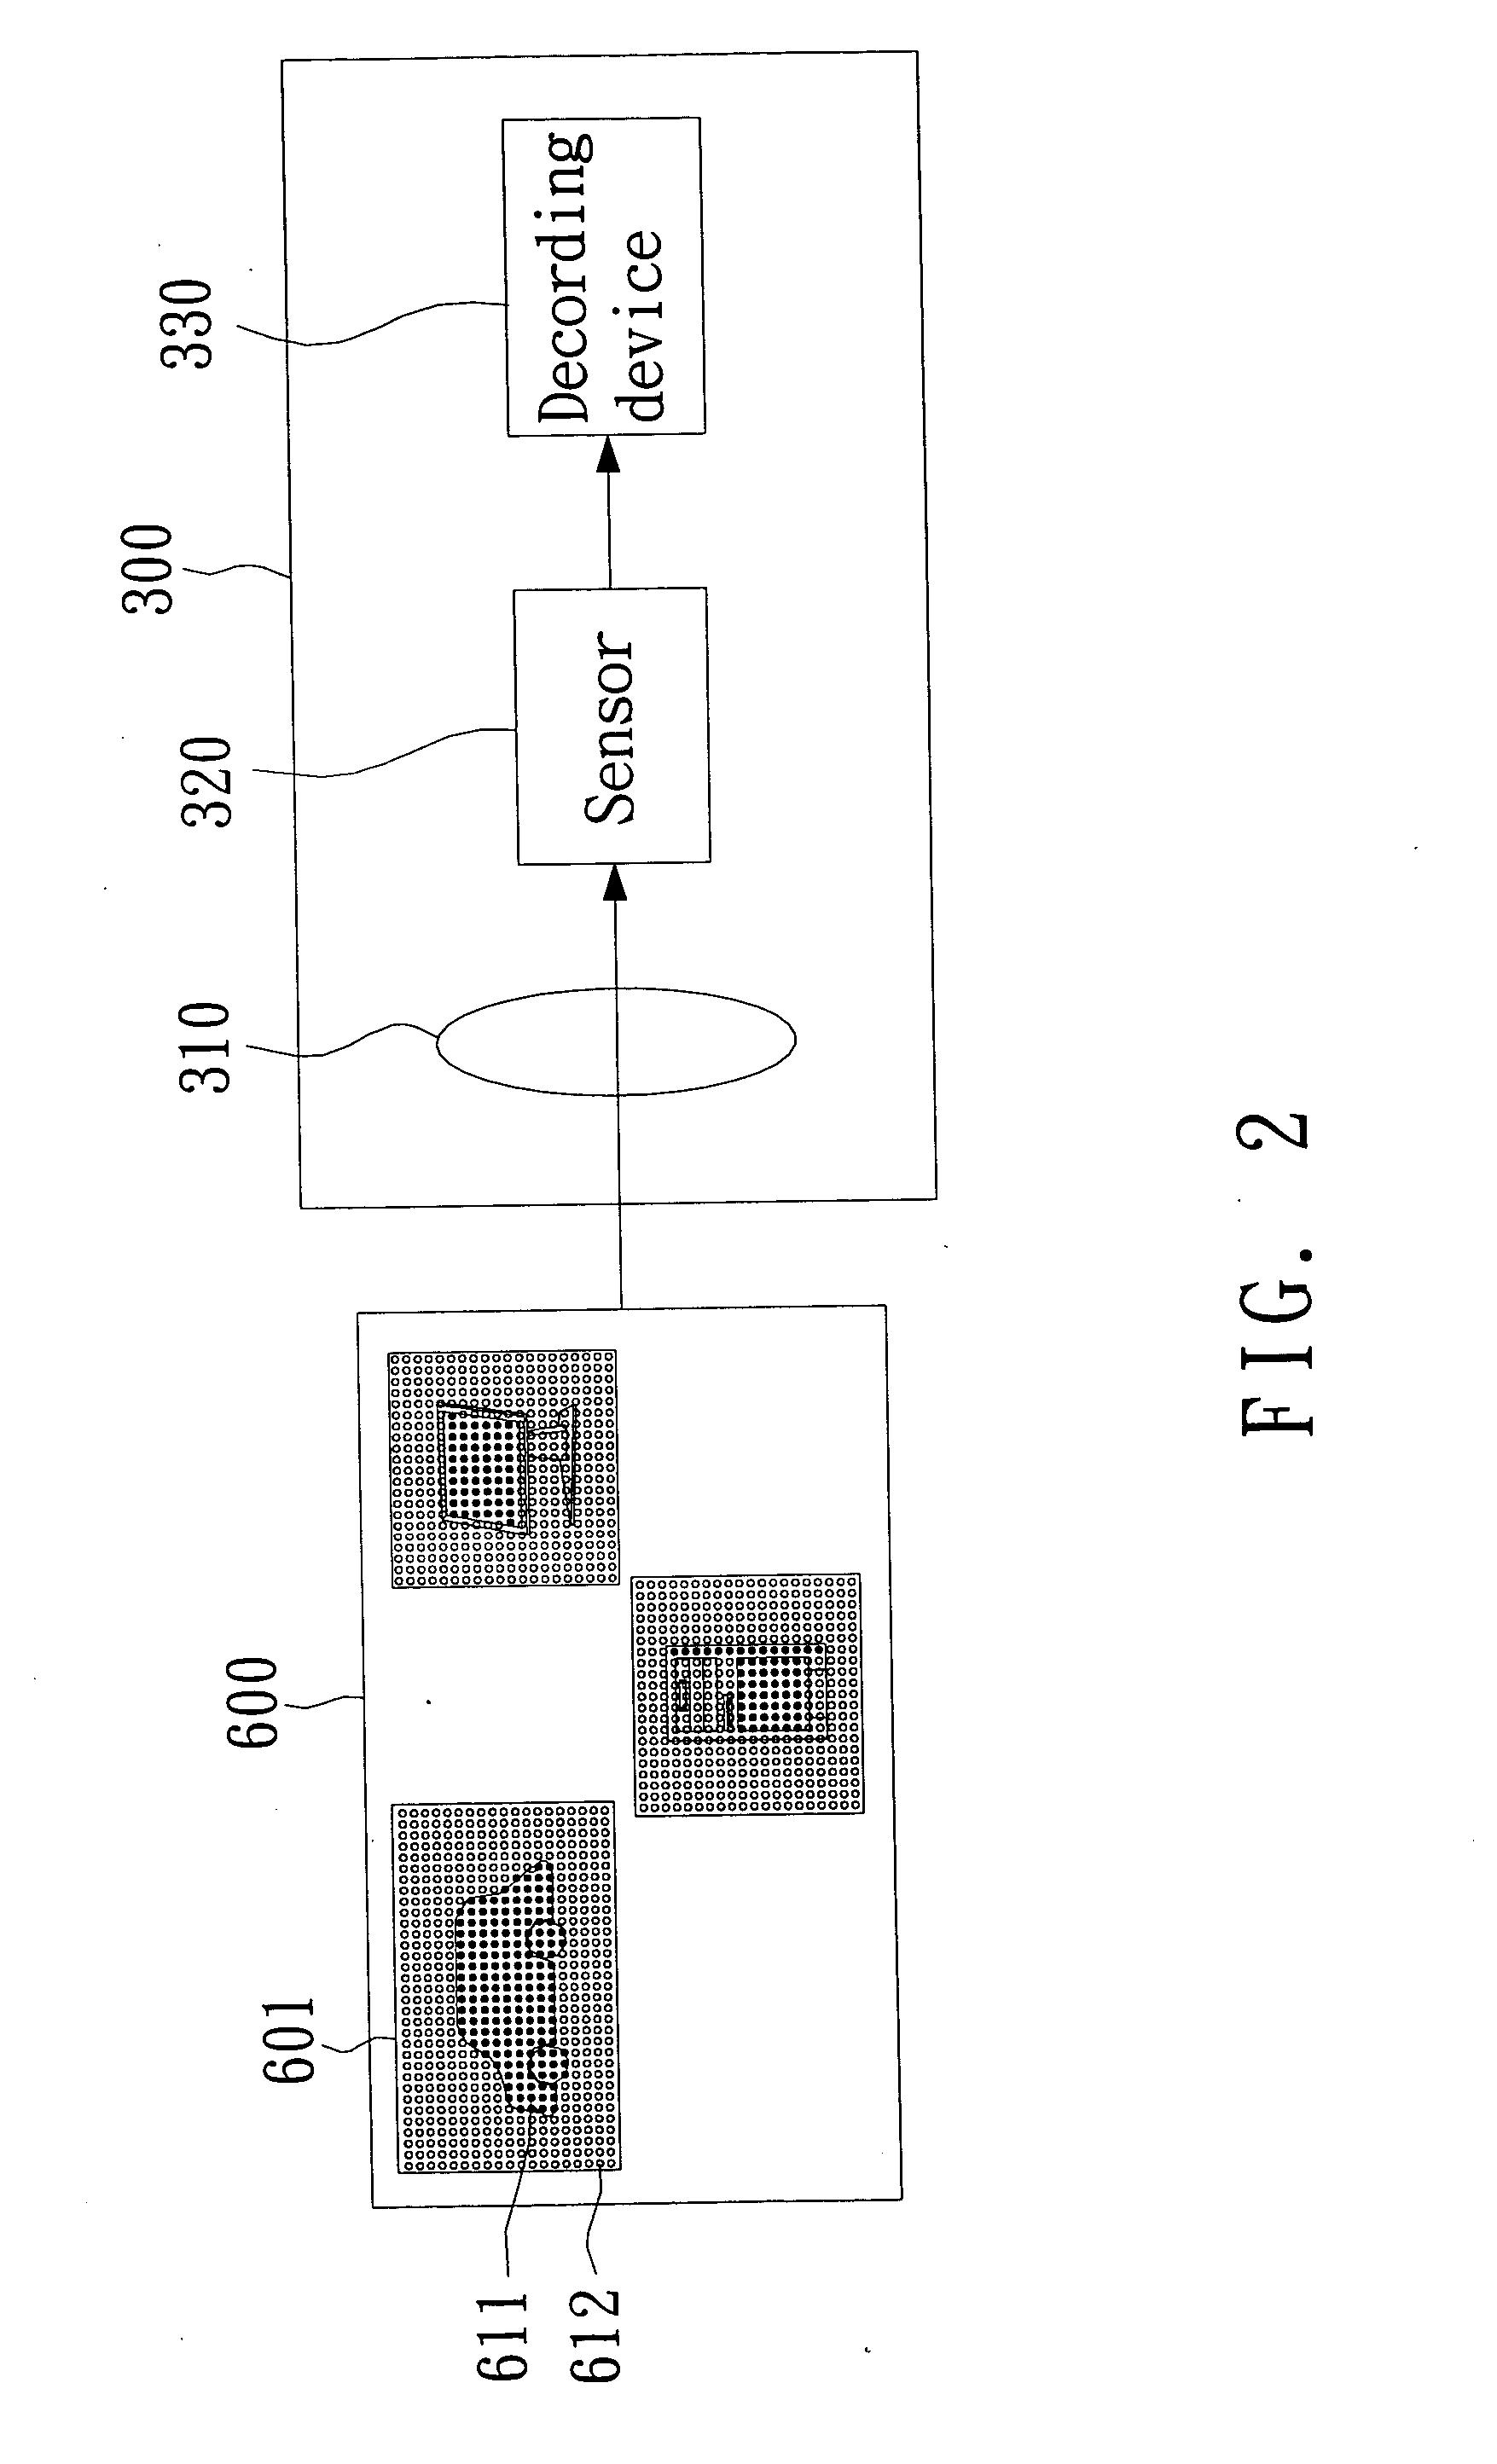 Document with indexes and associated document reader system